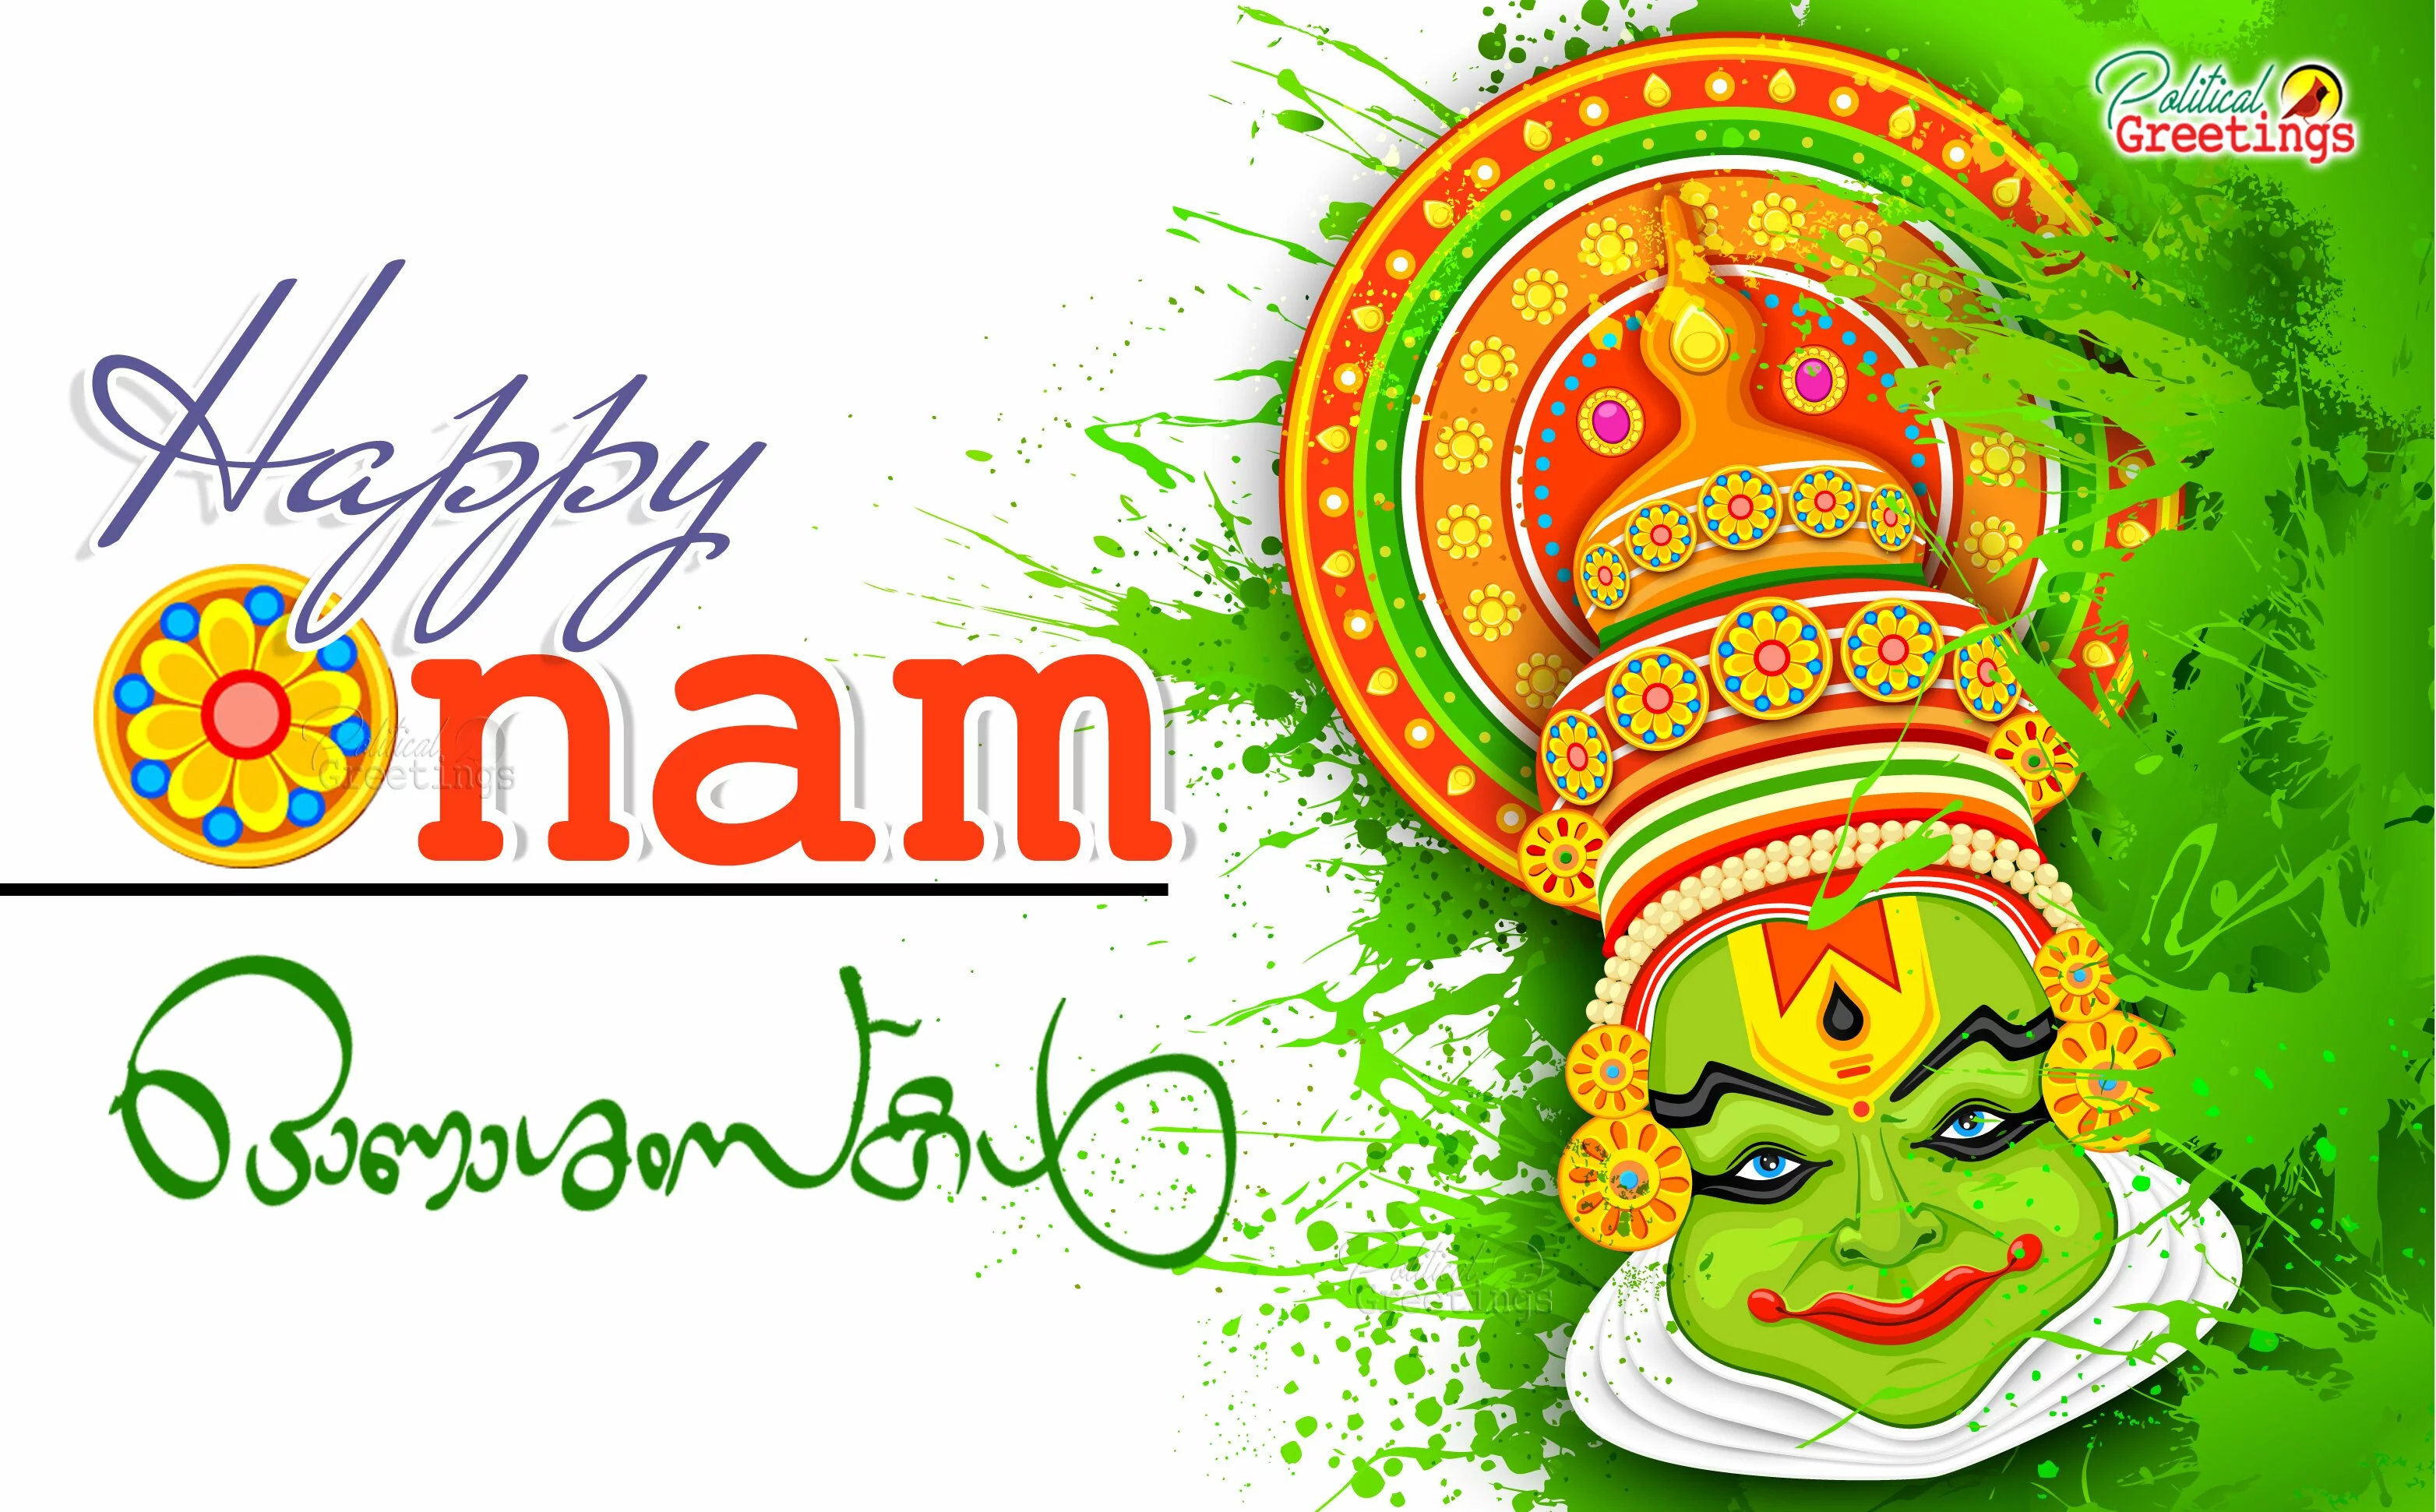 Download happy onam wishes and greetings in malayalam